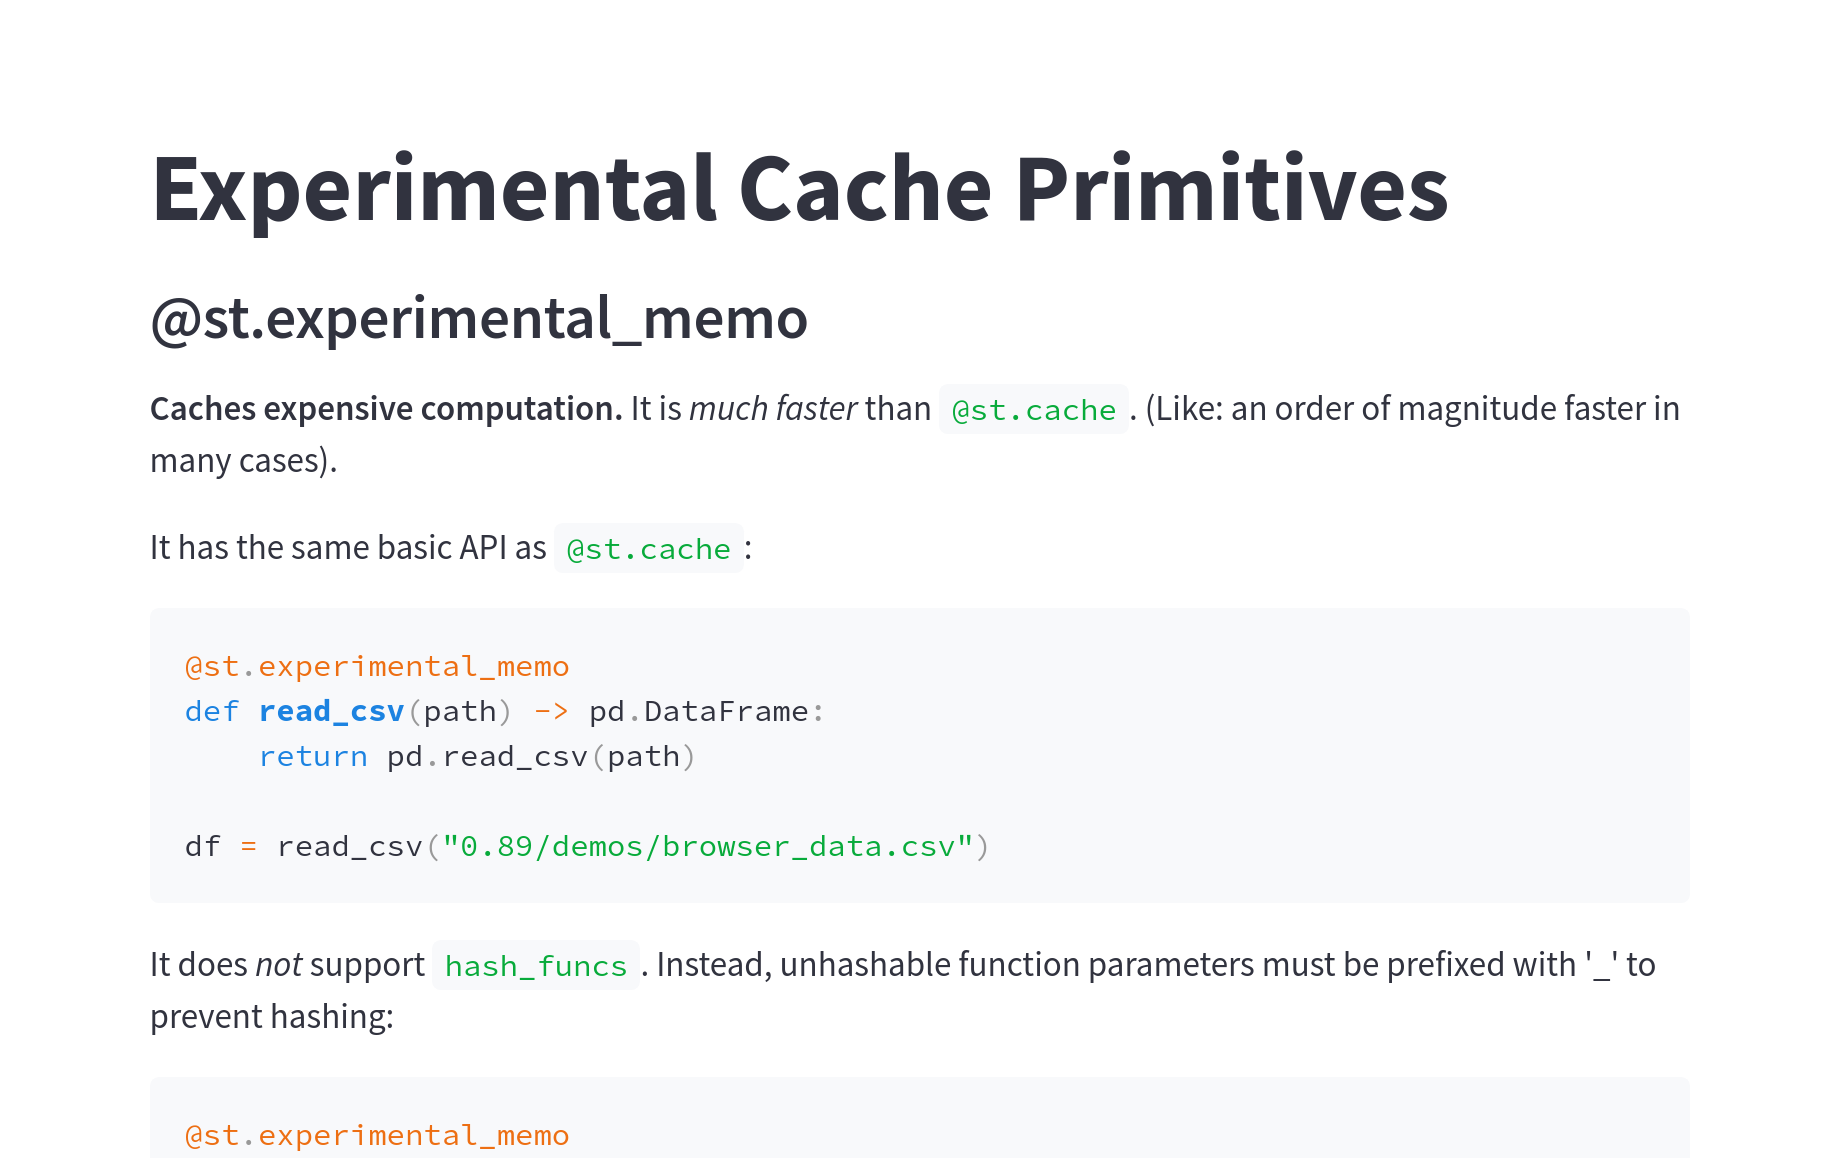 New experimental primitives for caching (that make your app 10x faster!)